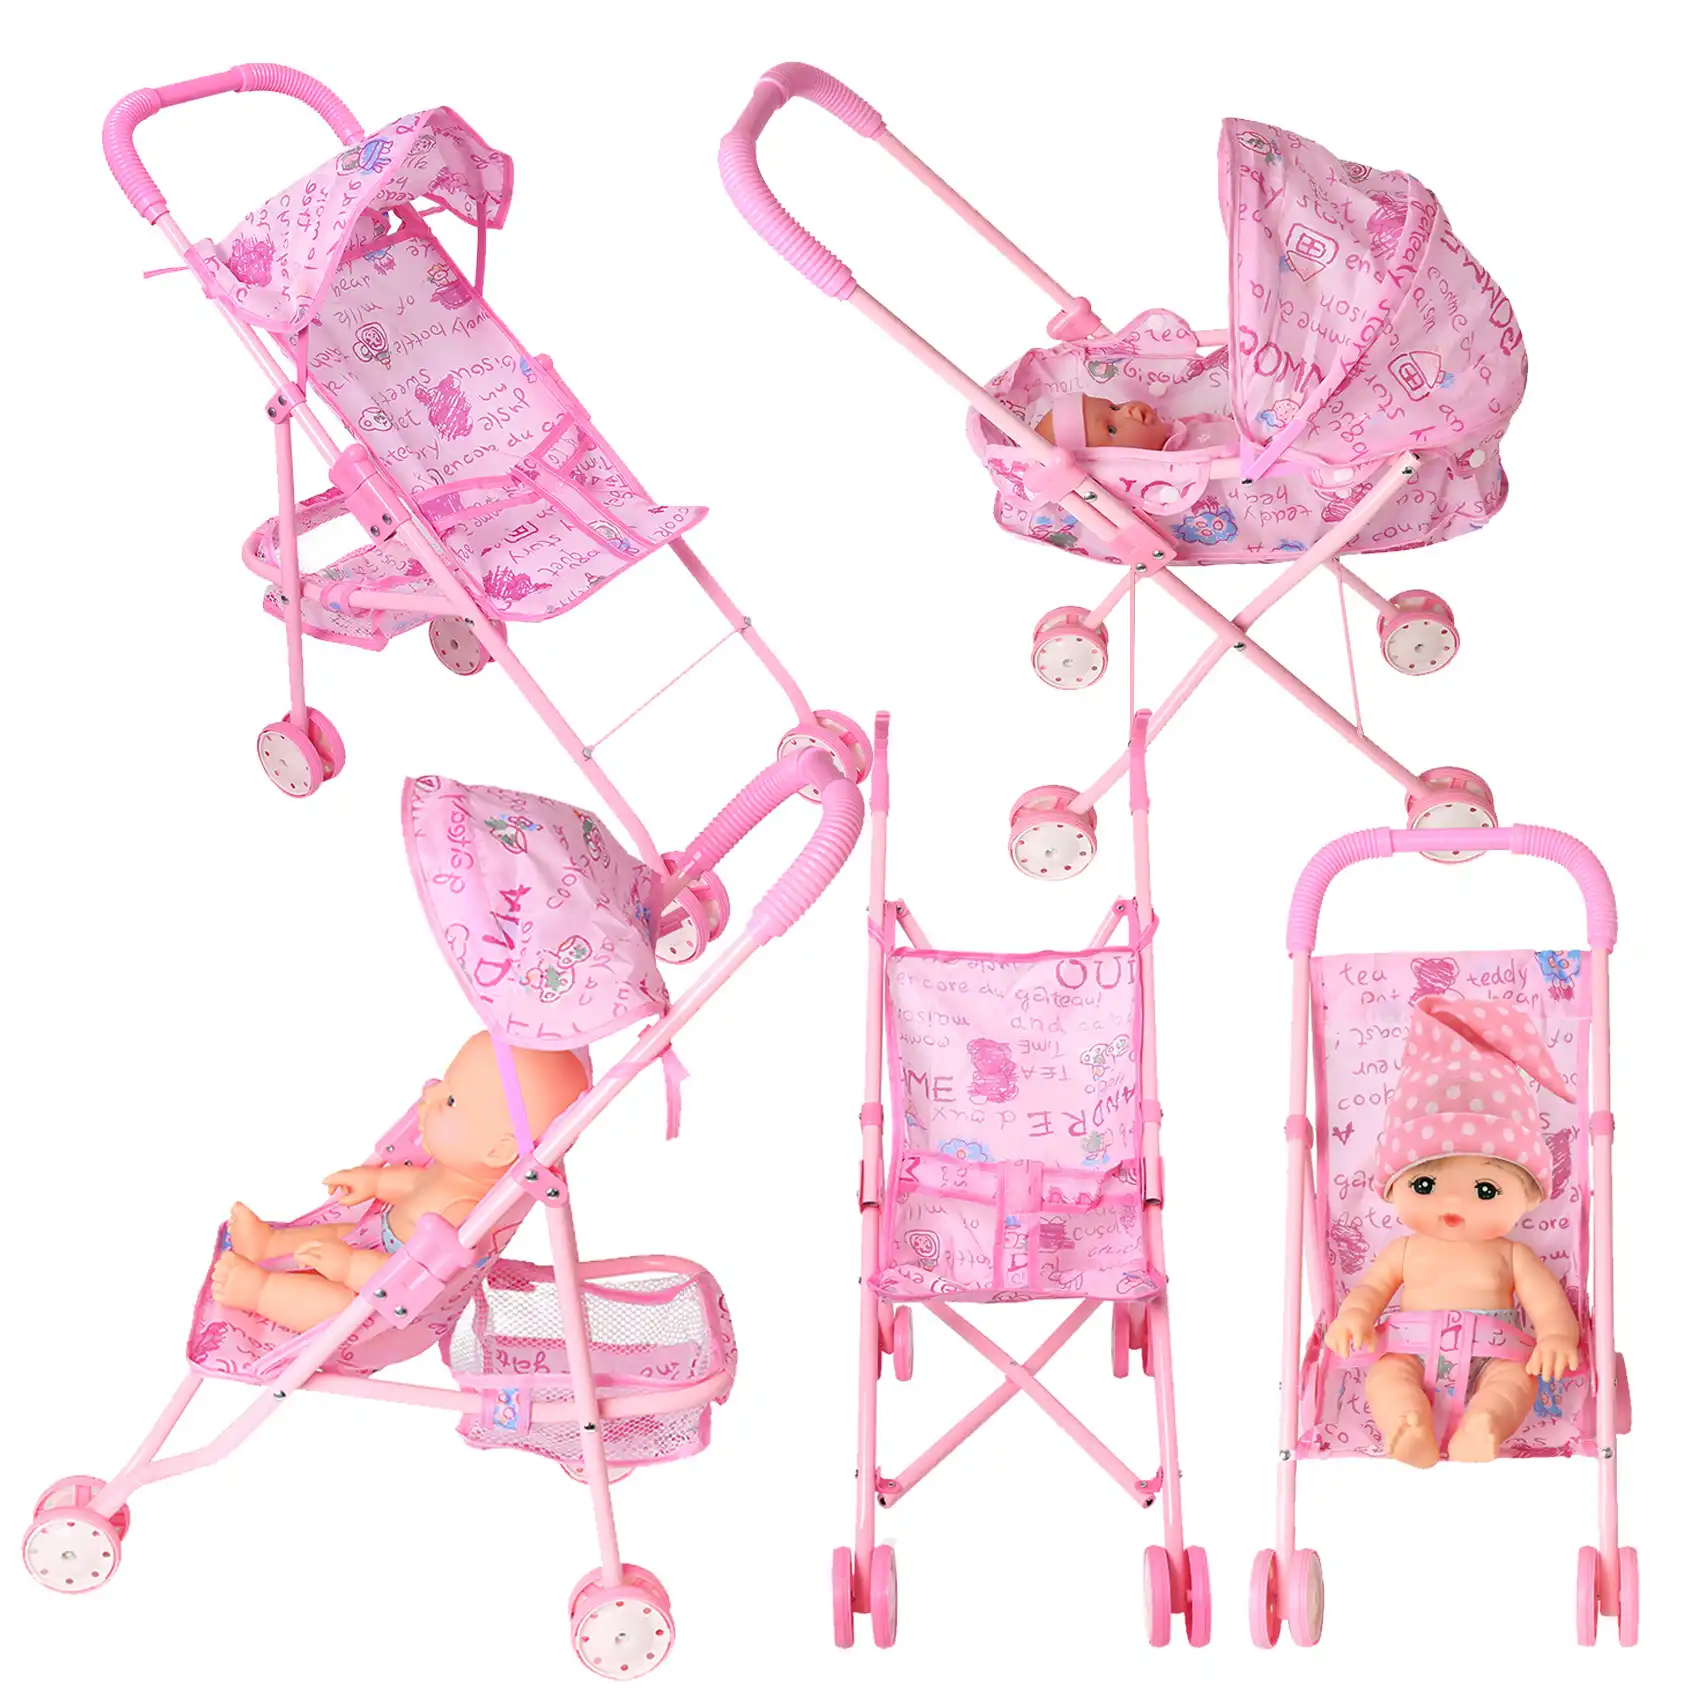 2 seat baby doll stroller